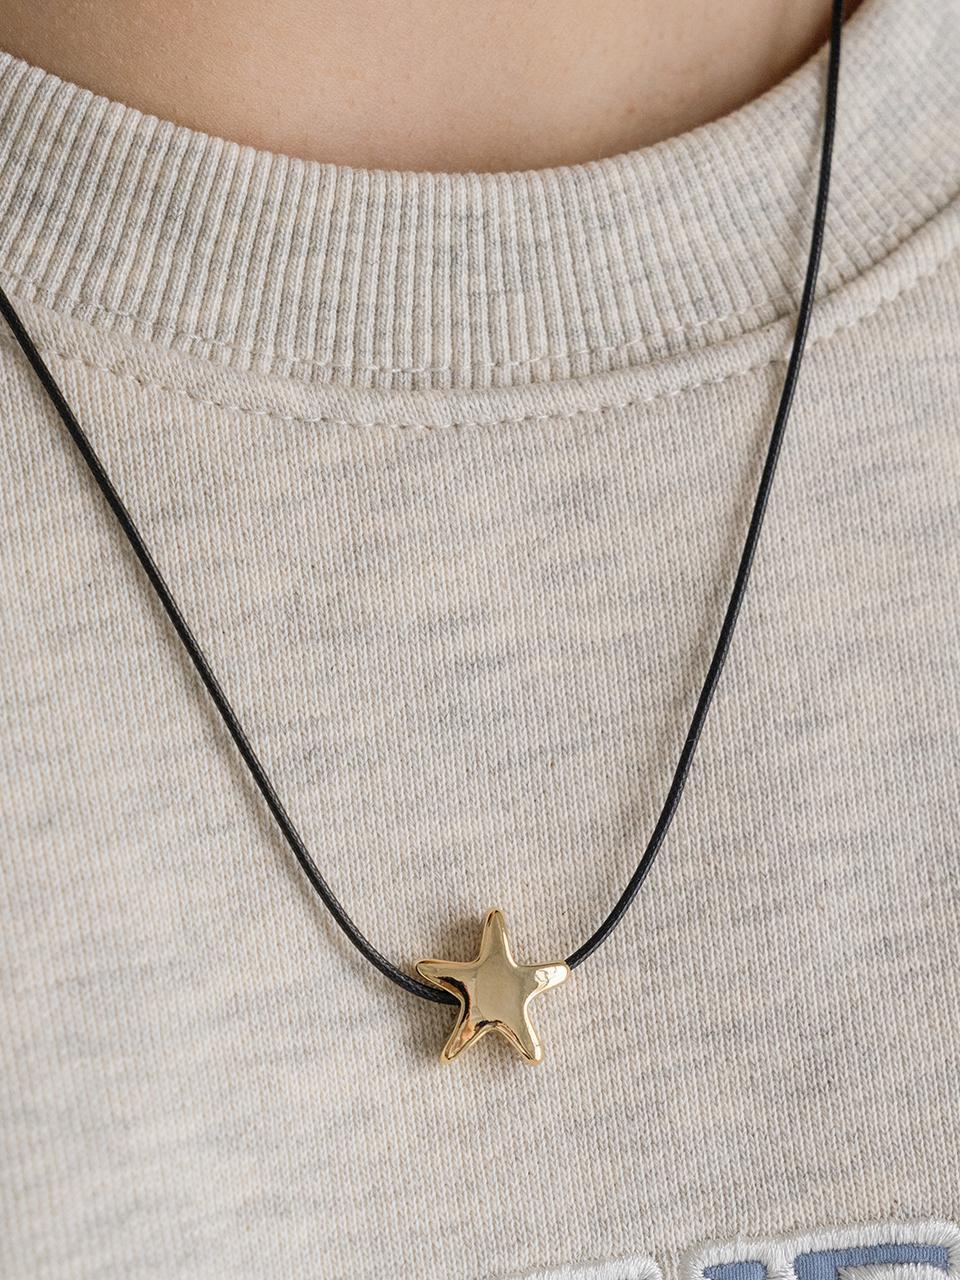 CKE214 Chubby Star Leather Strap Necklace